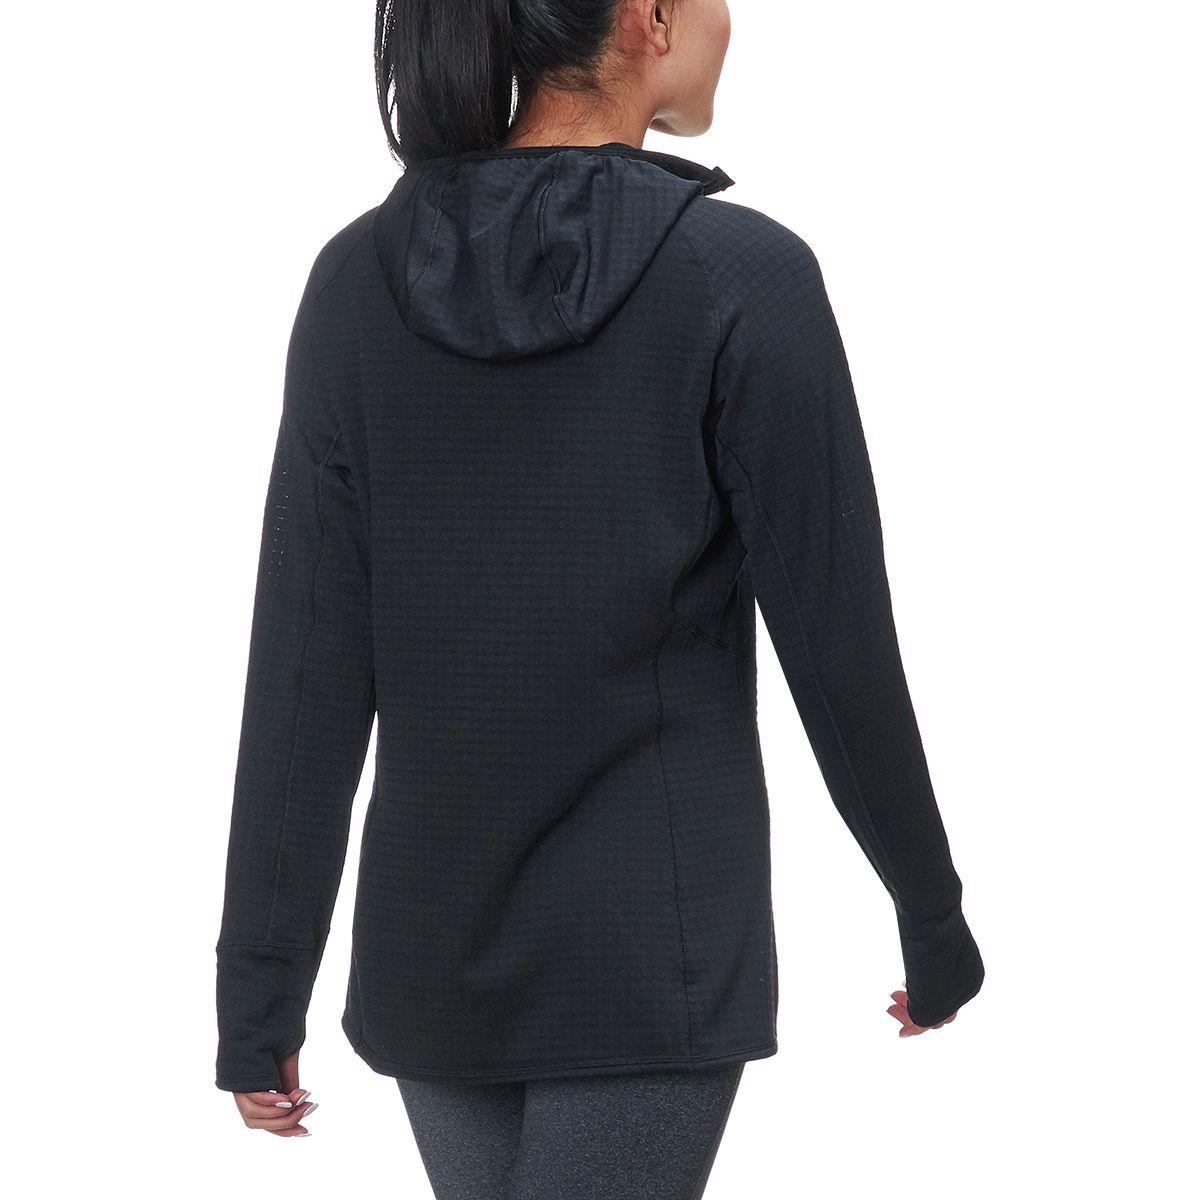 Patagonia R1 Fleece Hooded Pullover - Women's - Clothing